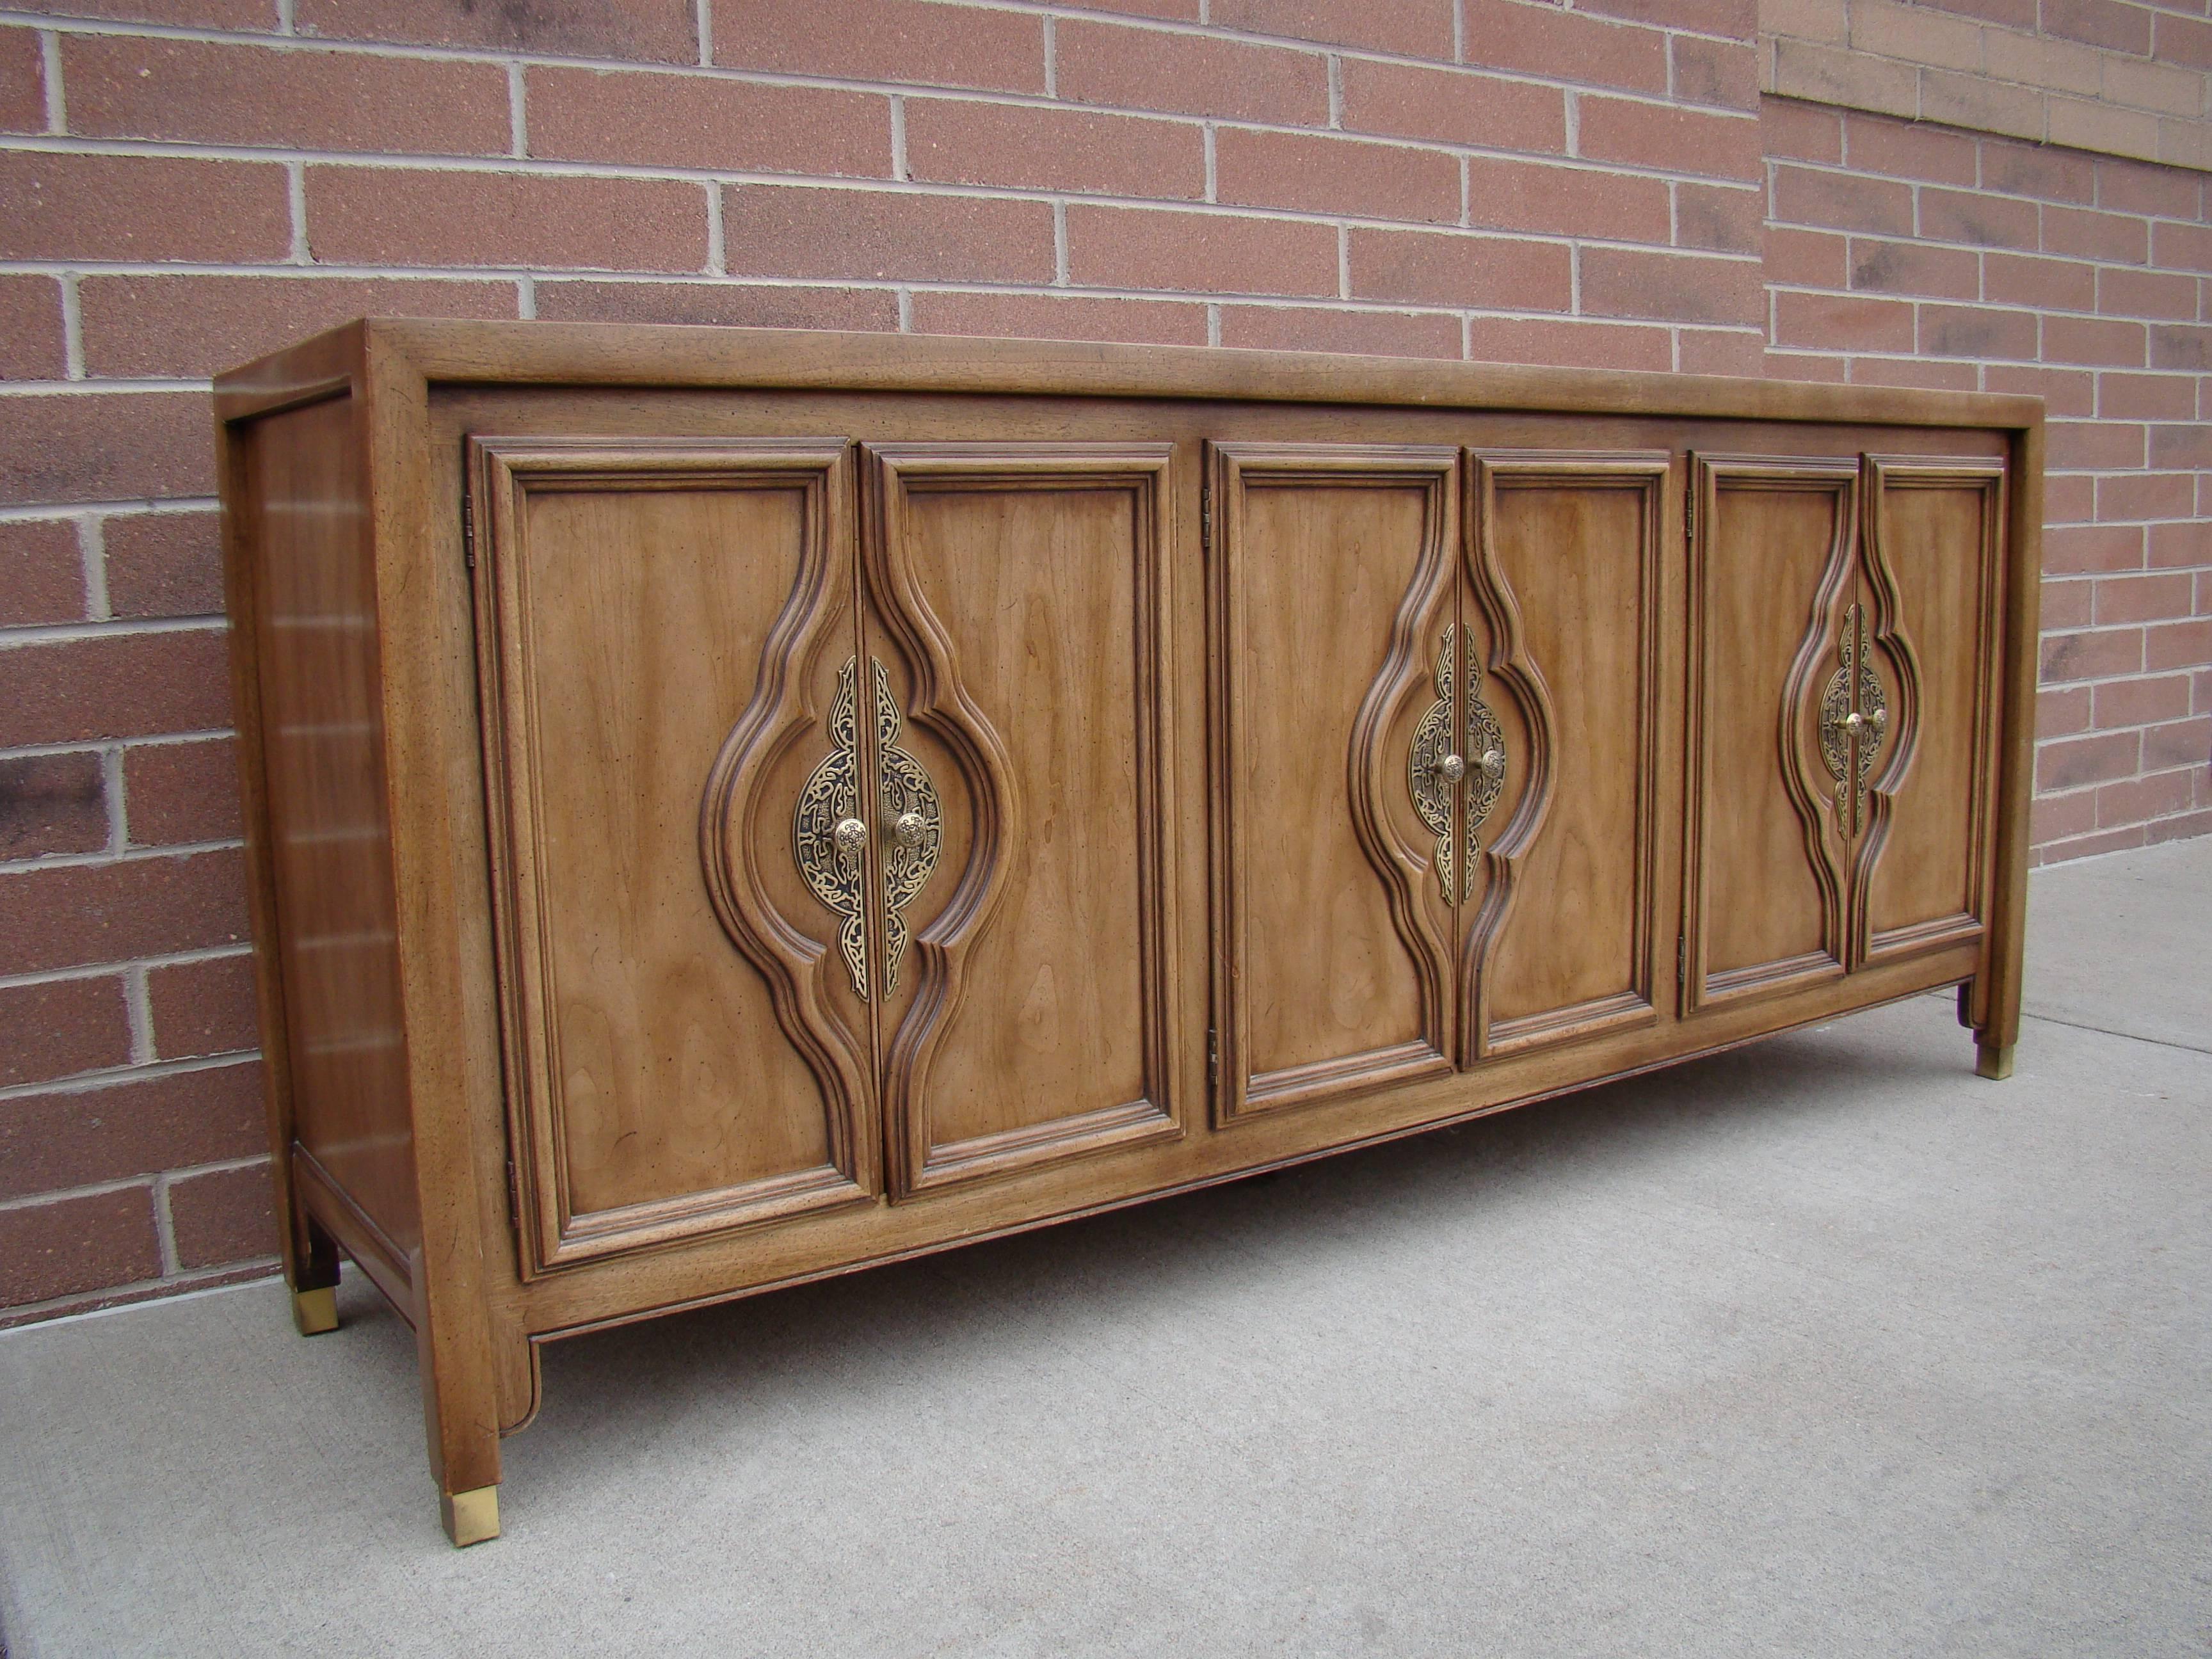 Beautiful Century Furniture credenza with brass detailing after James Mont, circa 1960s each side has shelves and the middle contains three drawers. Good vintage condition all around except for the top which has some wear and some water damage. A